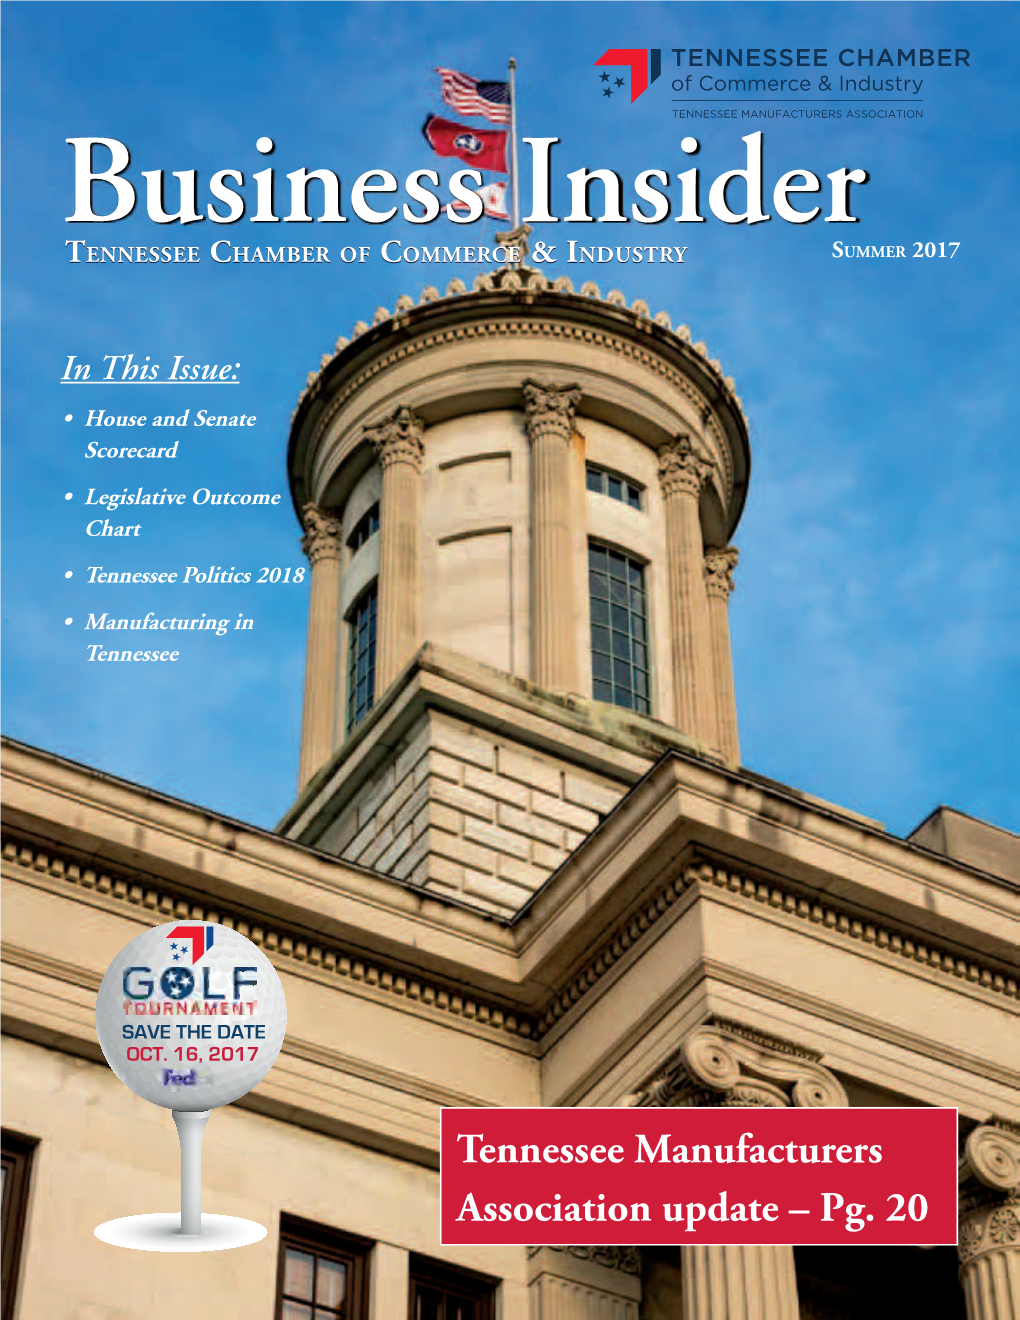 Tennessee Manufacturers Association Update – Pg